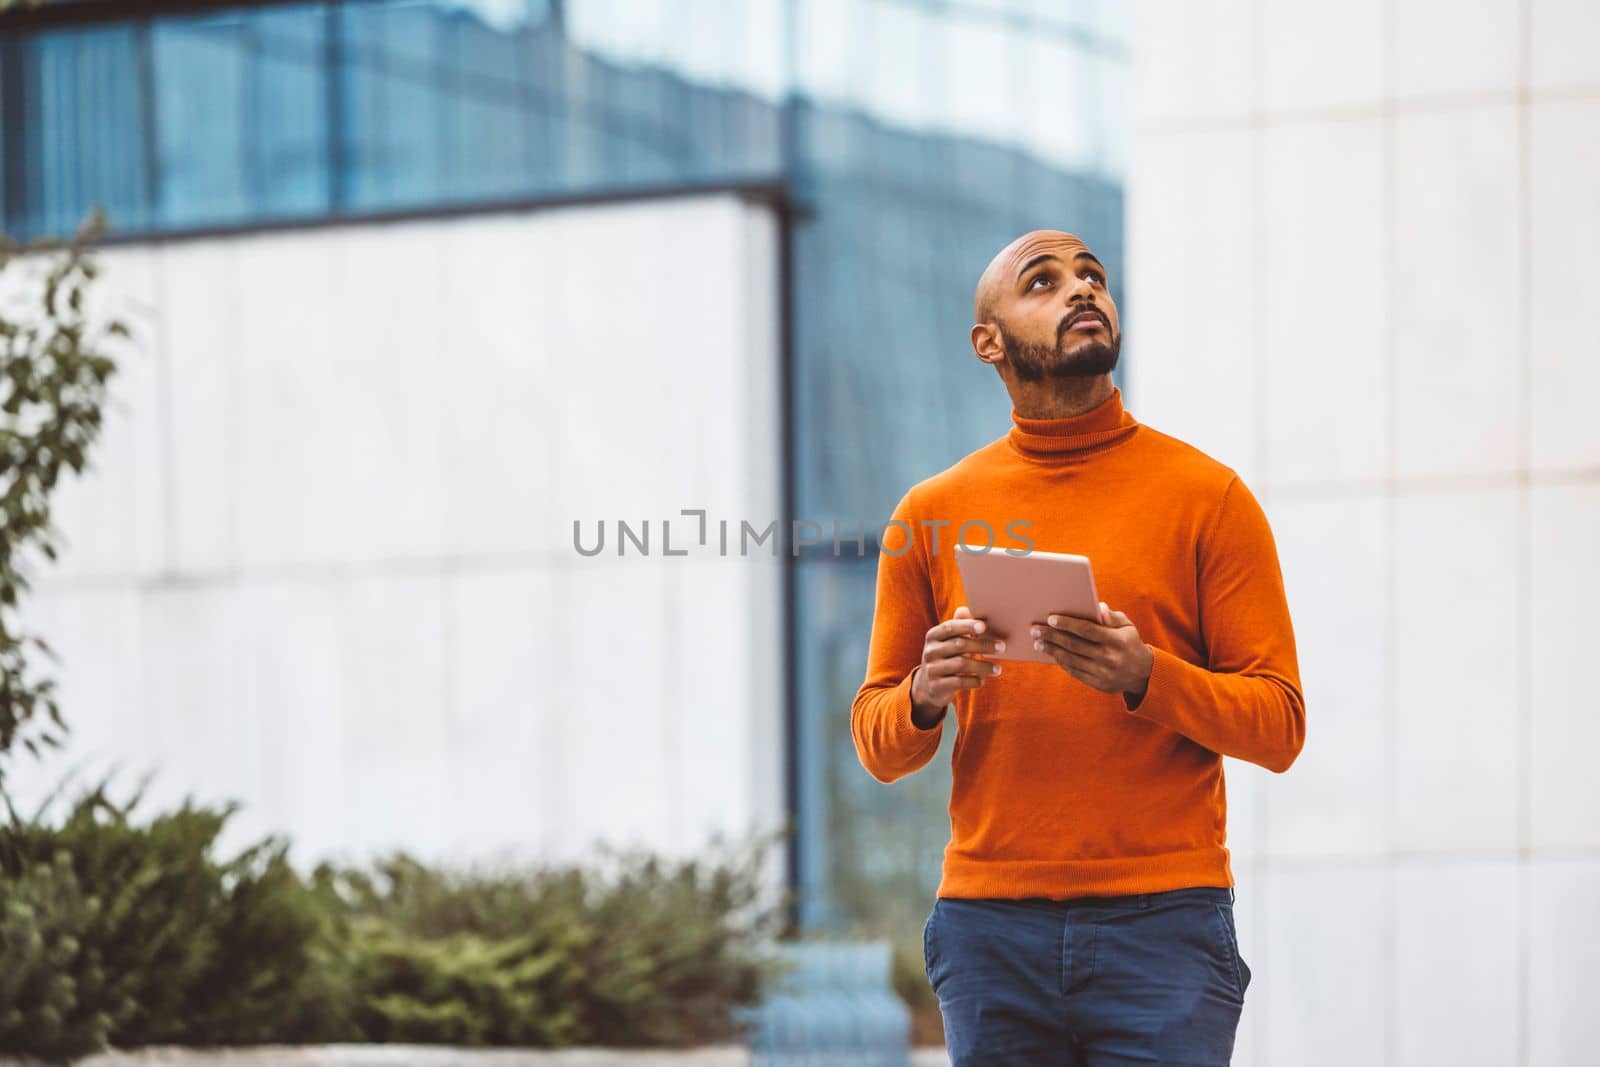 Caucasian man in an orange sweater standing outside in an urban setting holding a digital device, office buildings in the background.